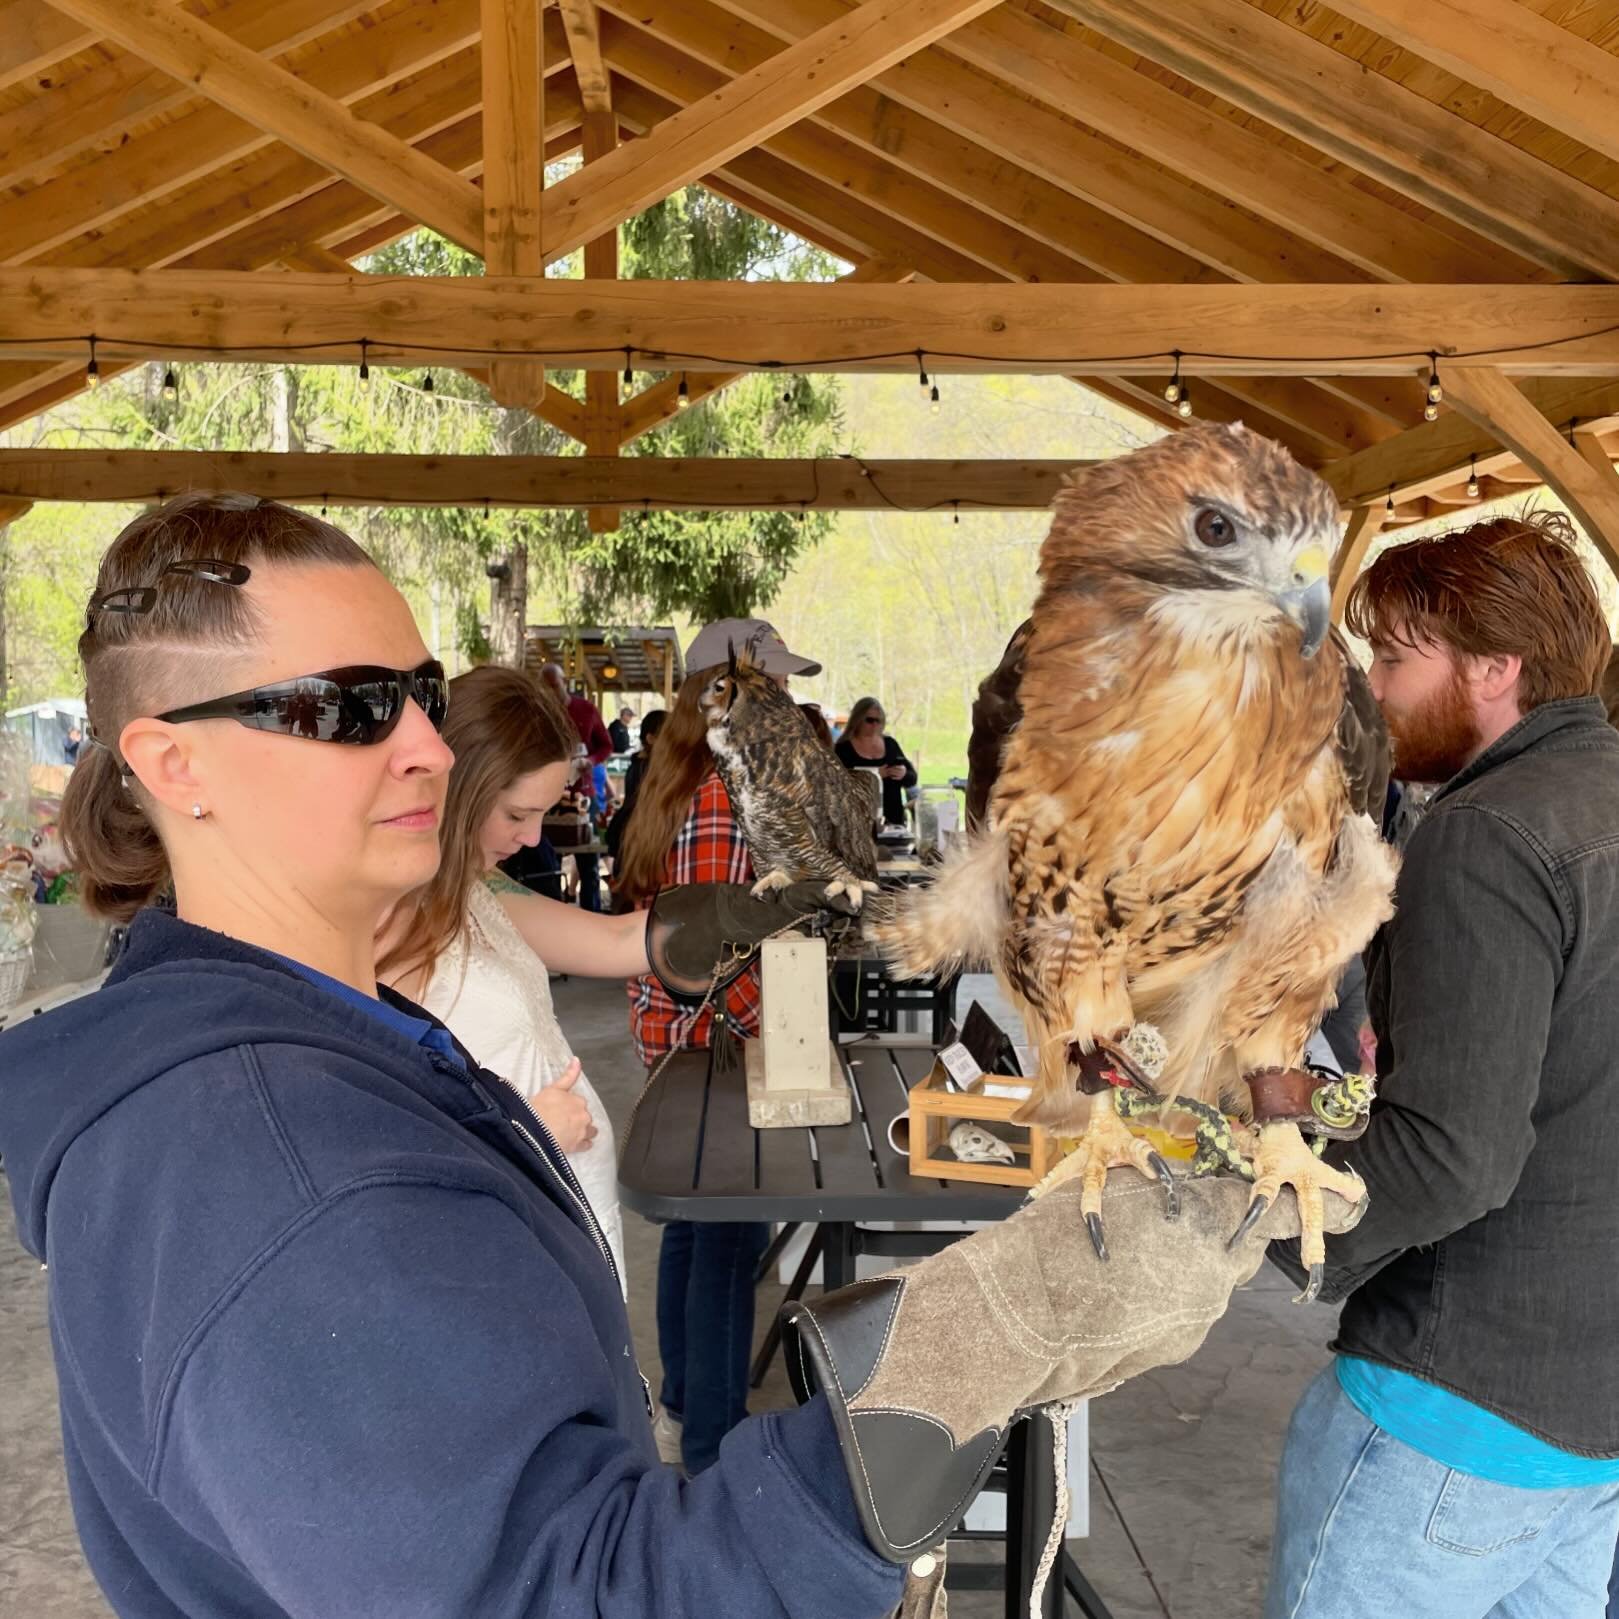 Our third annual Bird &lsquo;N Brews with @birdsofwhisperingwillow is this Sunday! Join us for an afternoon of family fun featuring winged friends from Whispering Willow, local business raffles baskets, and food from @twofortheroadfood &amp; @platedp